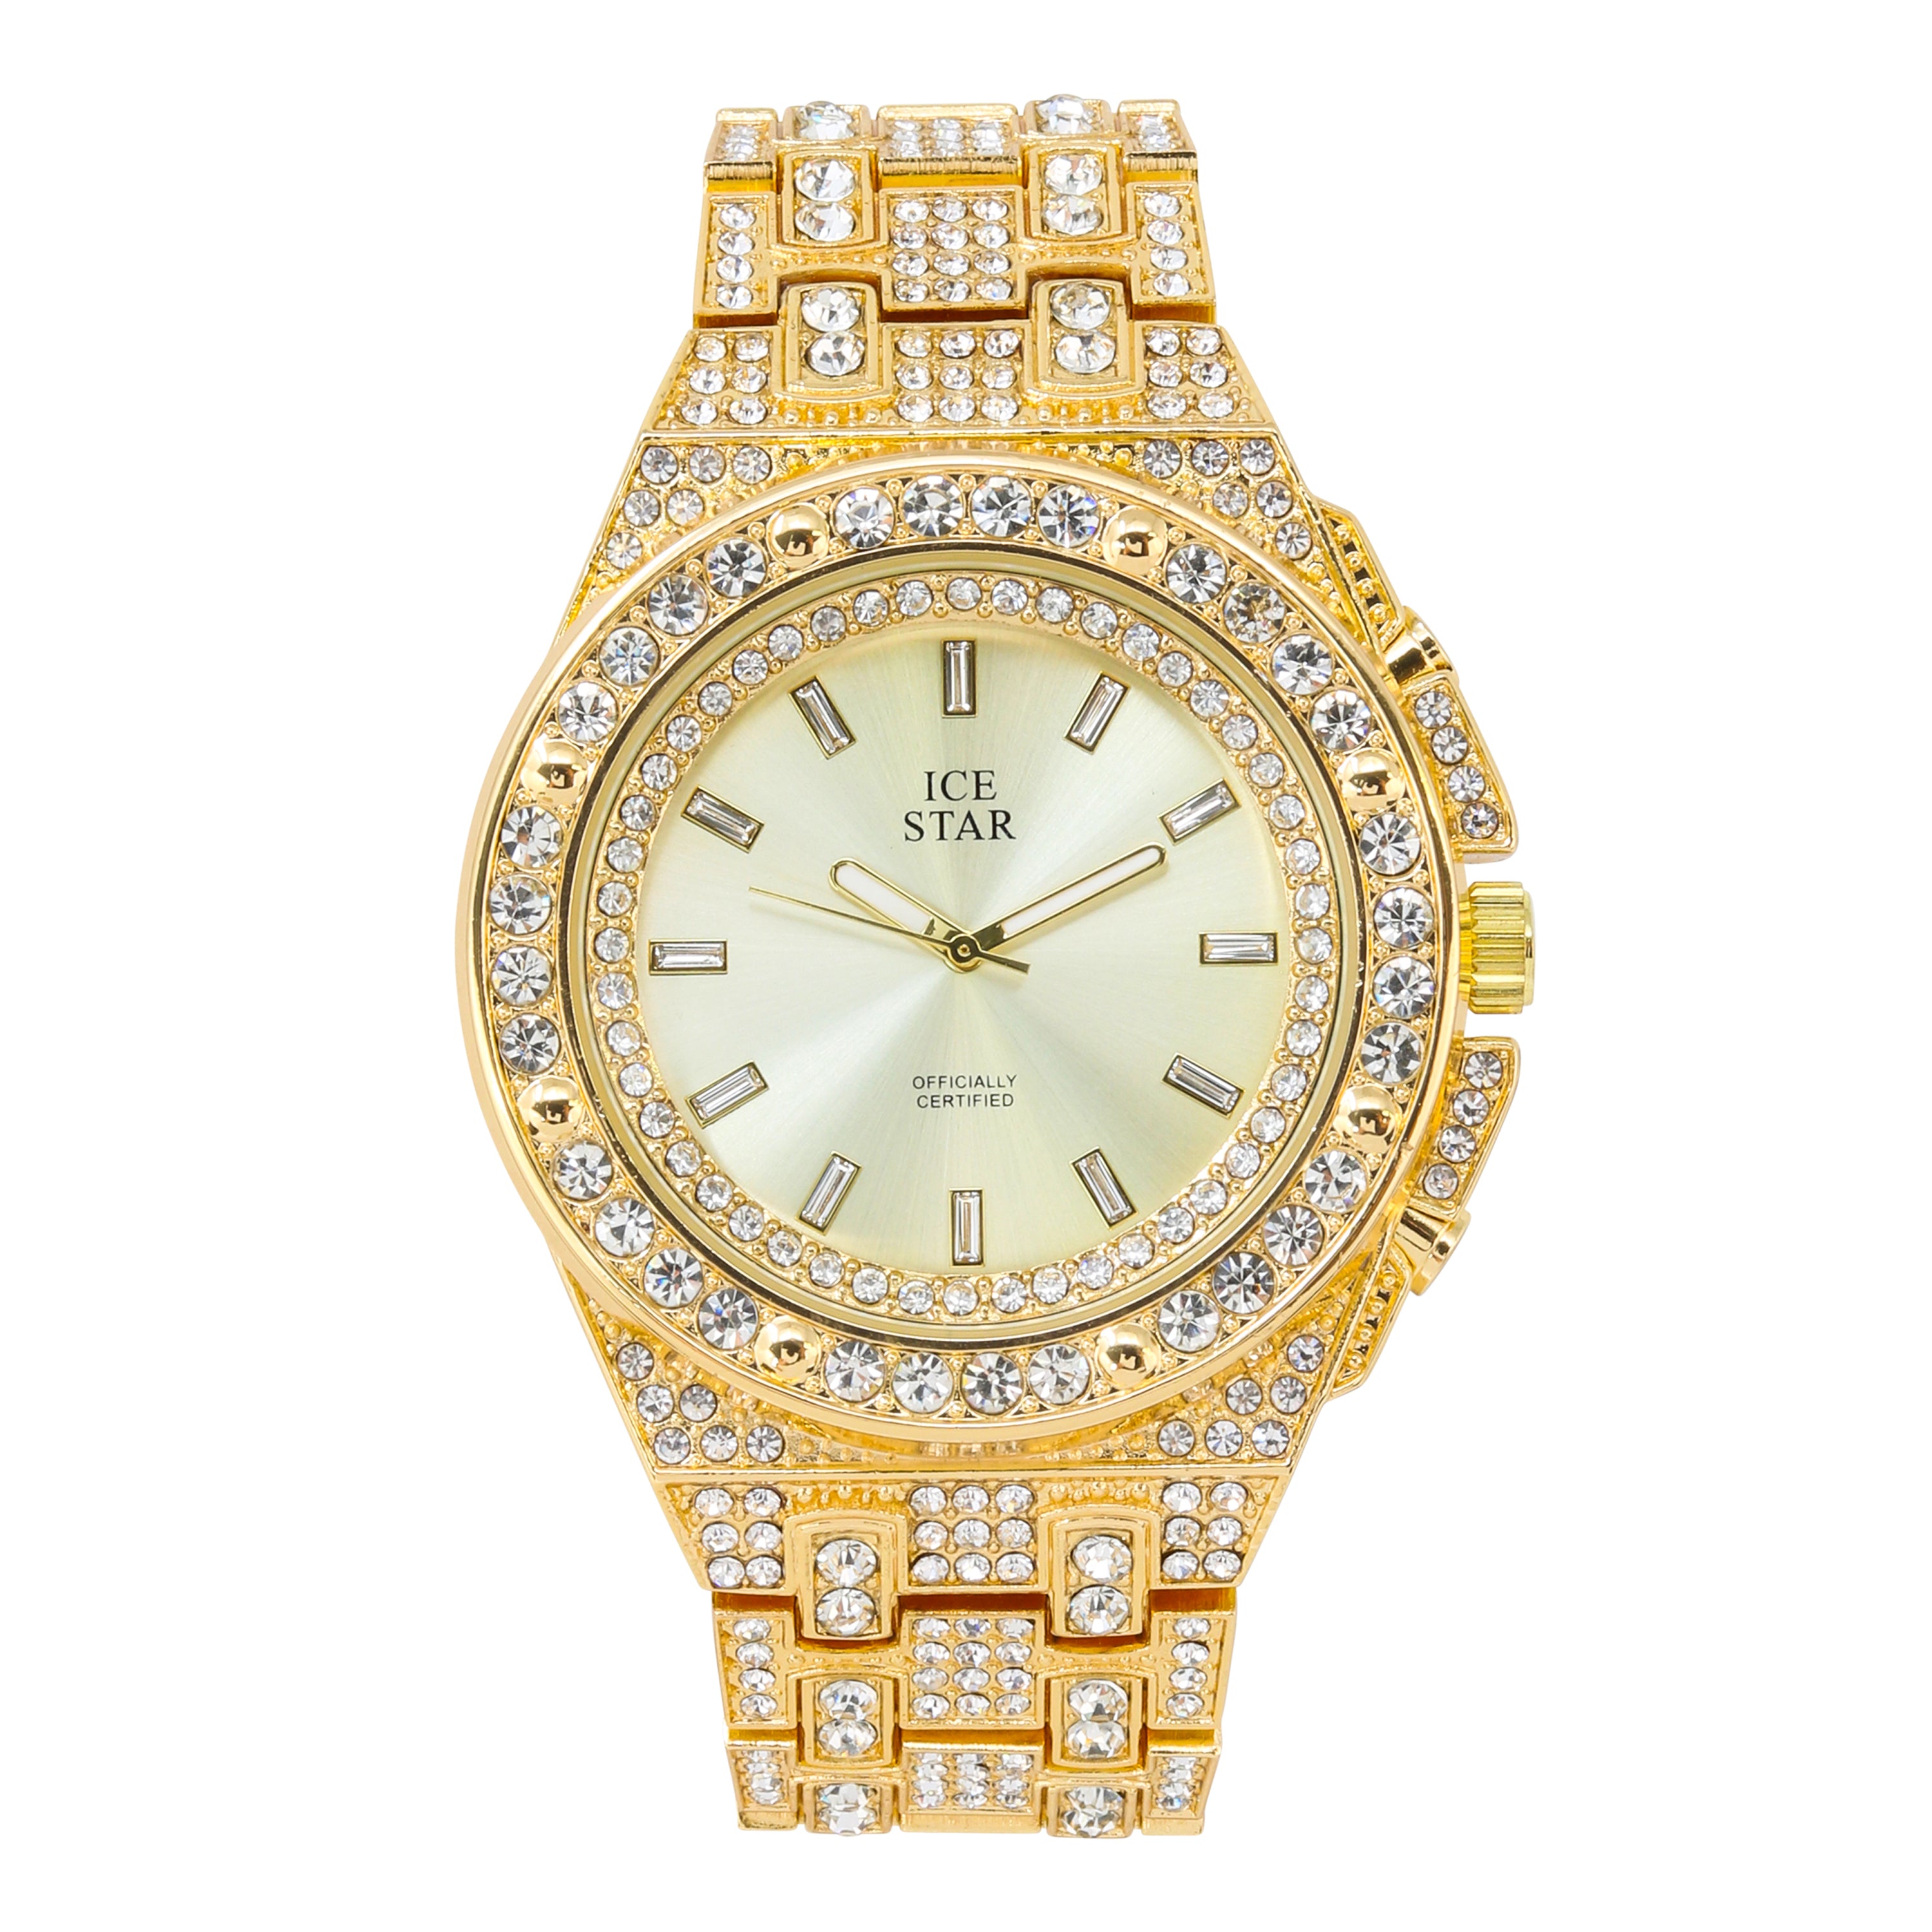 Men's Round Iced Out Watch 45mm Gold - Baguette Dial